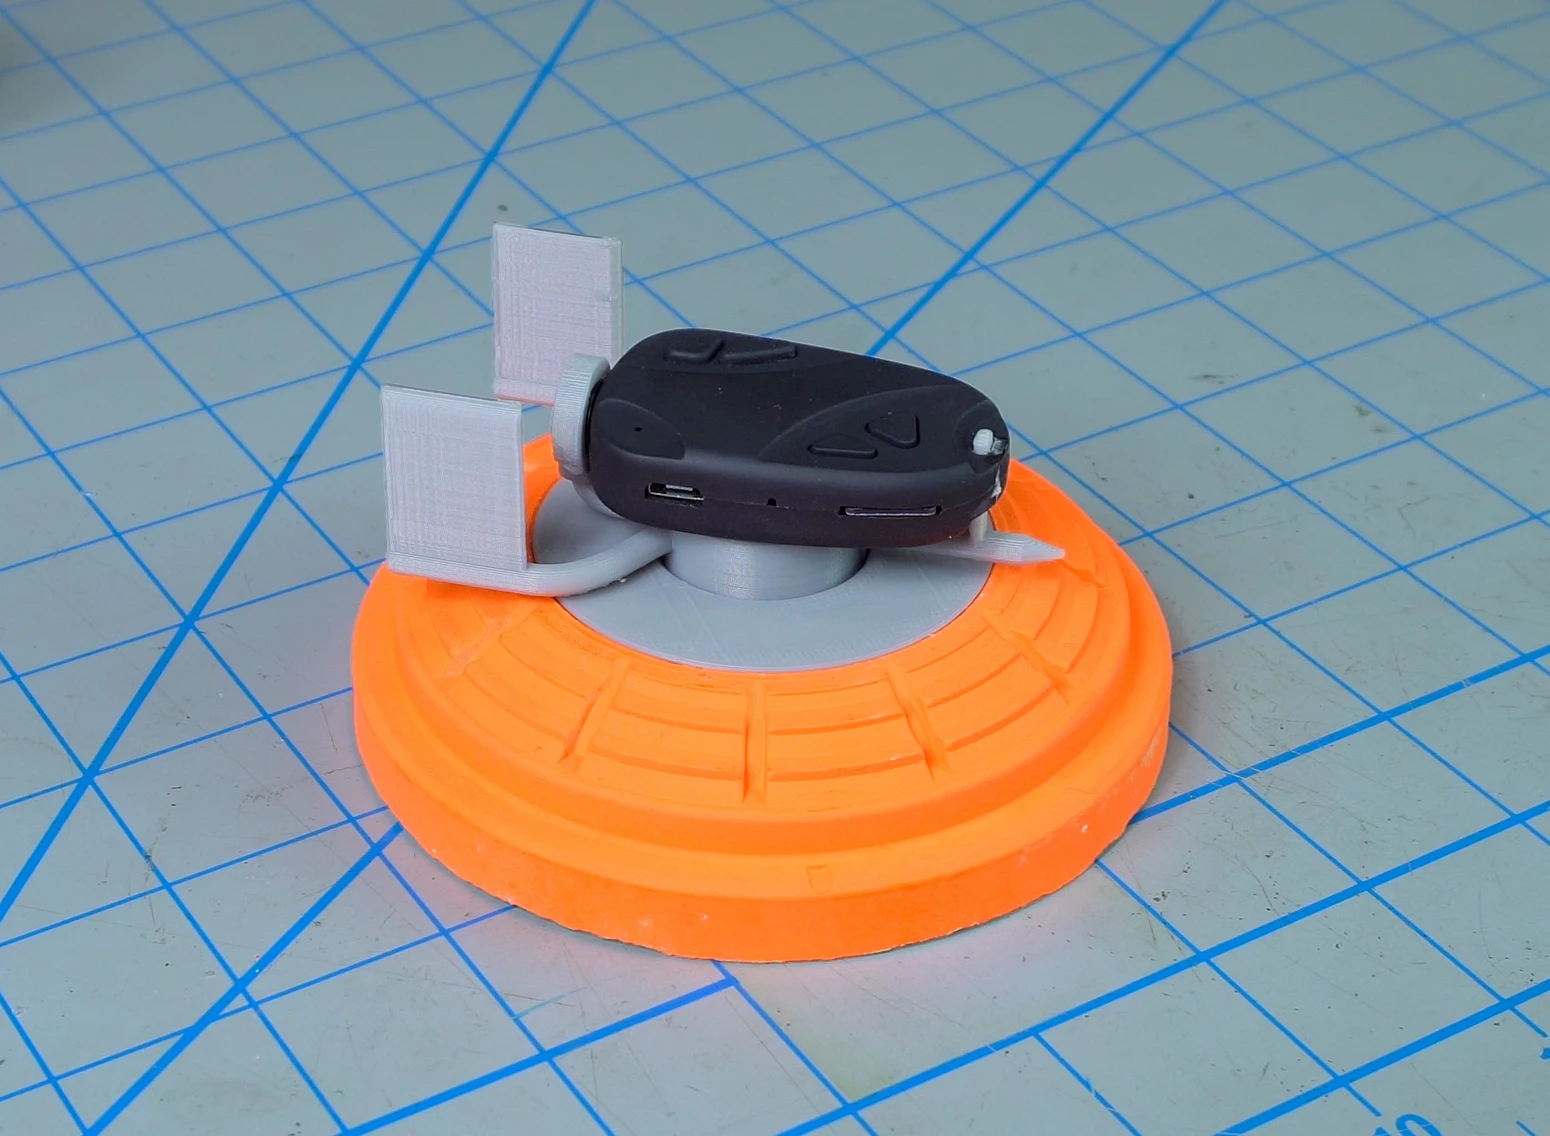 Clay pigeon with 3d printed rotating camera mount